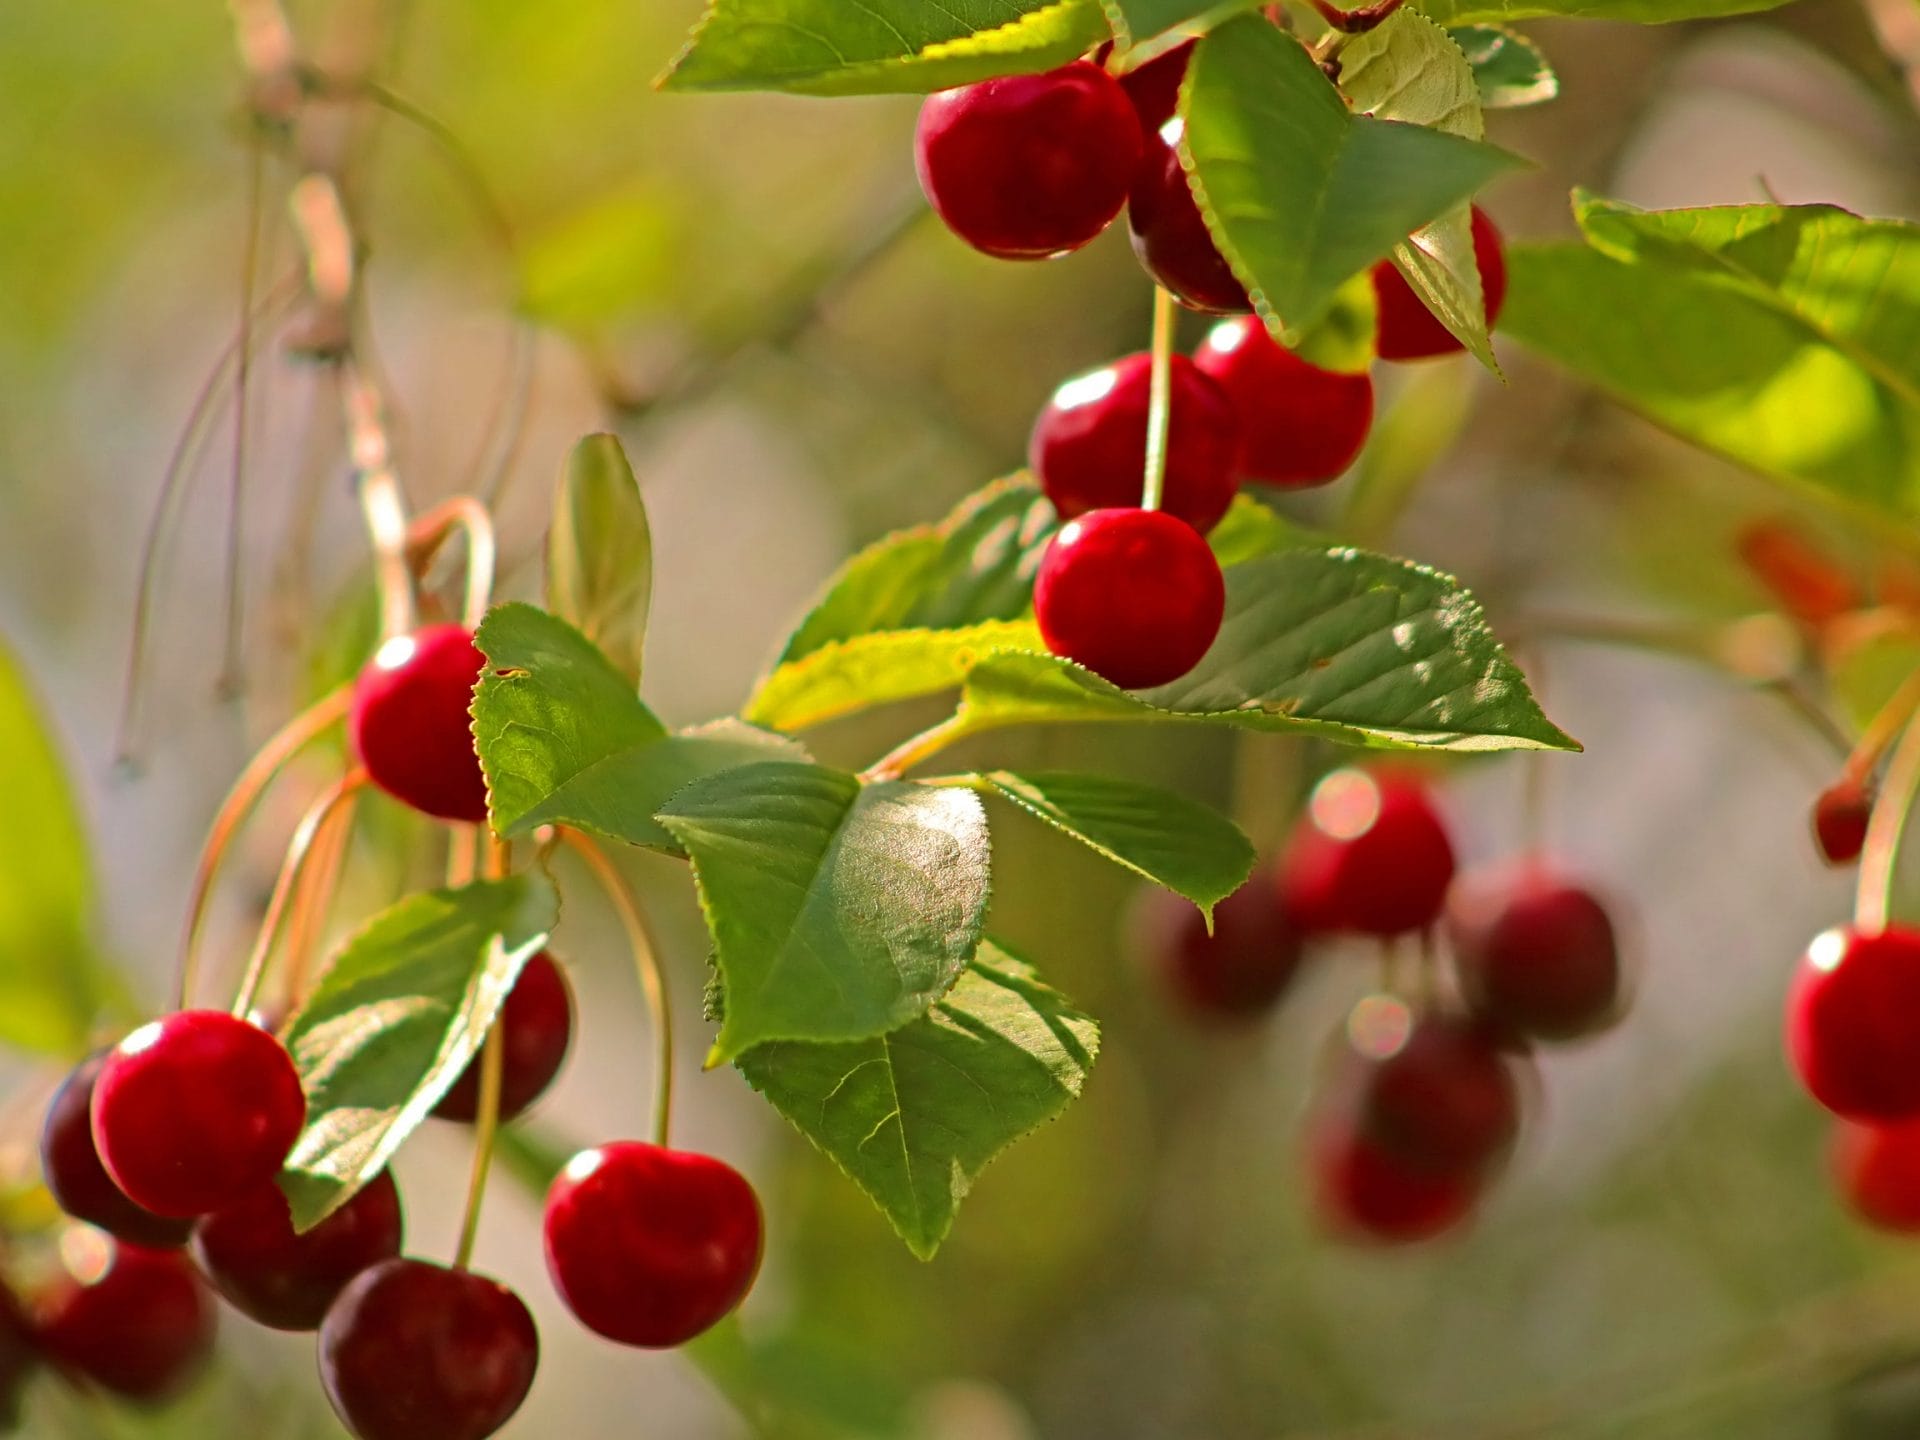 7 Different Types of Cherries and How to Use Them